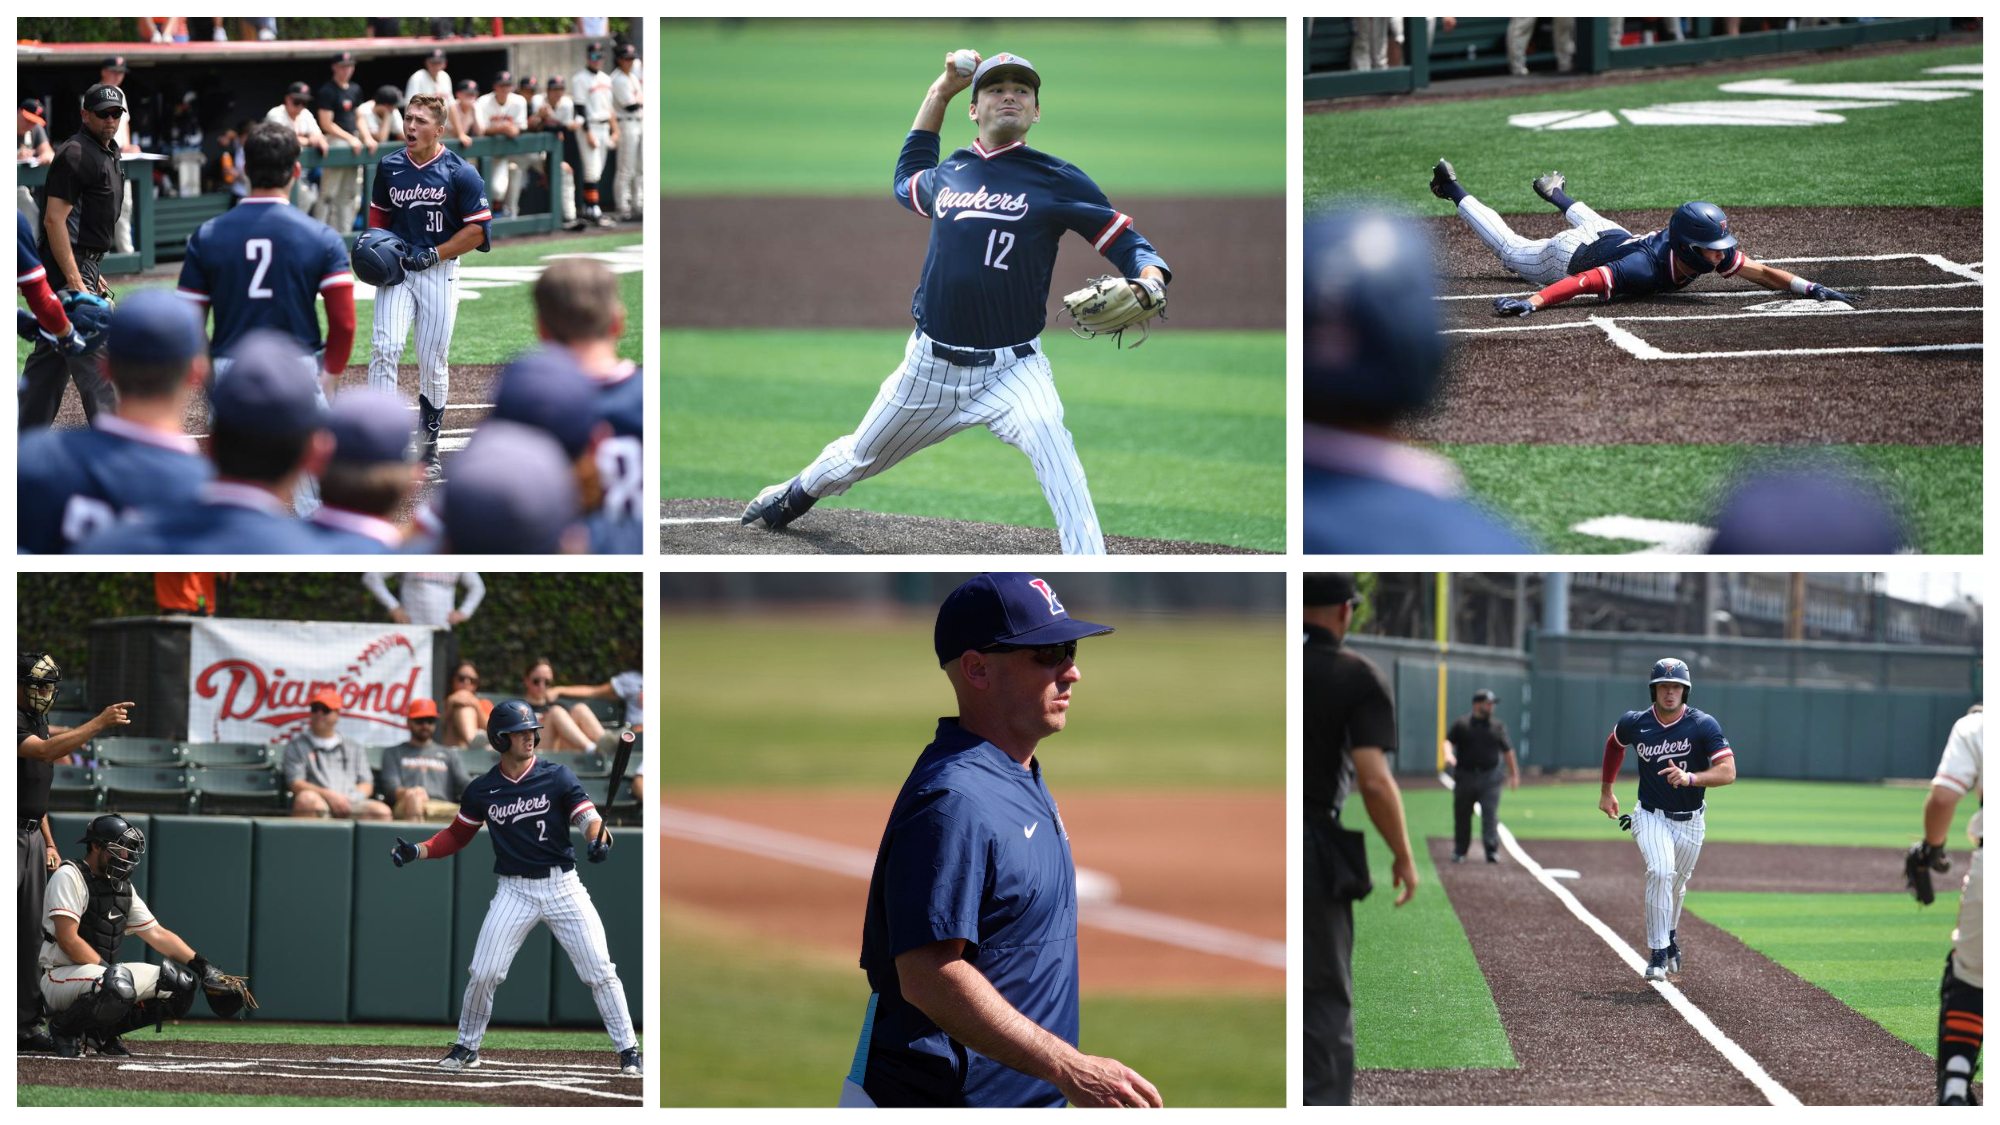 A collage of Penn baseball players throwing the ball, sliding into home, preparing to hit, and running the bases.